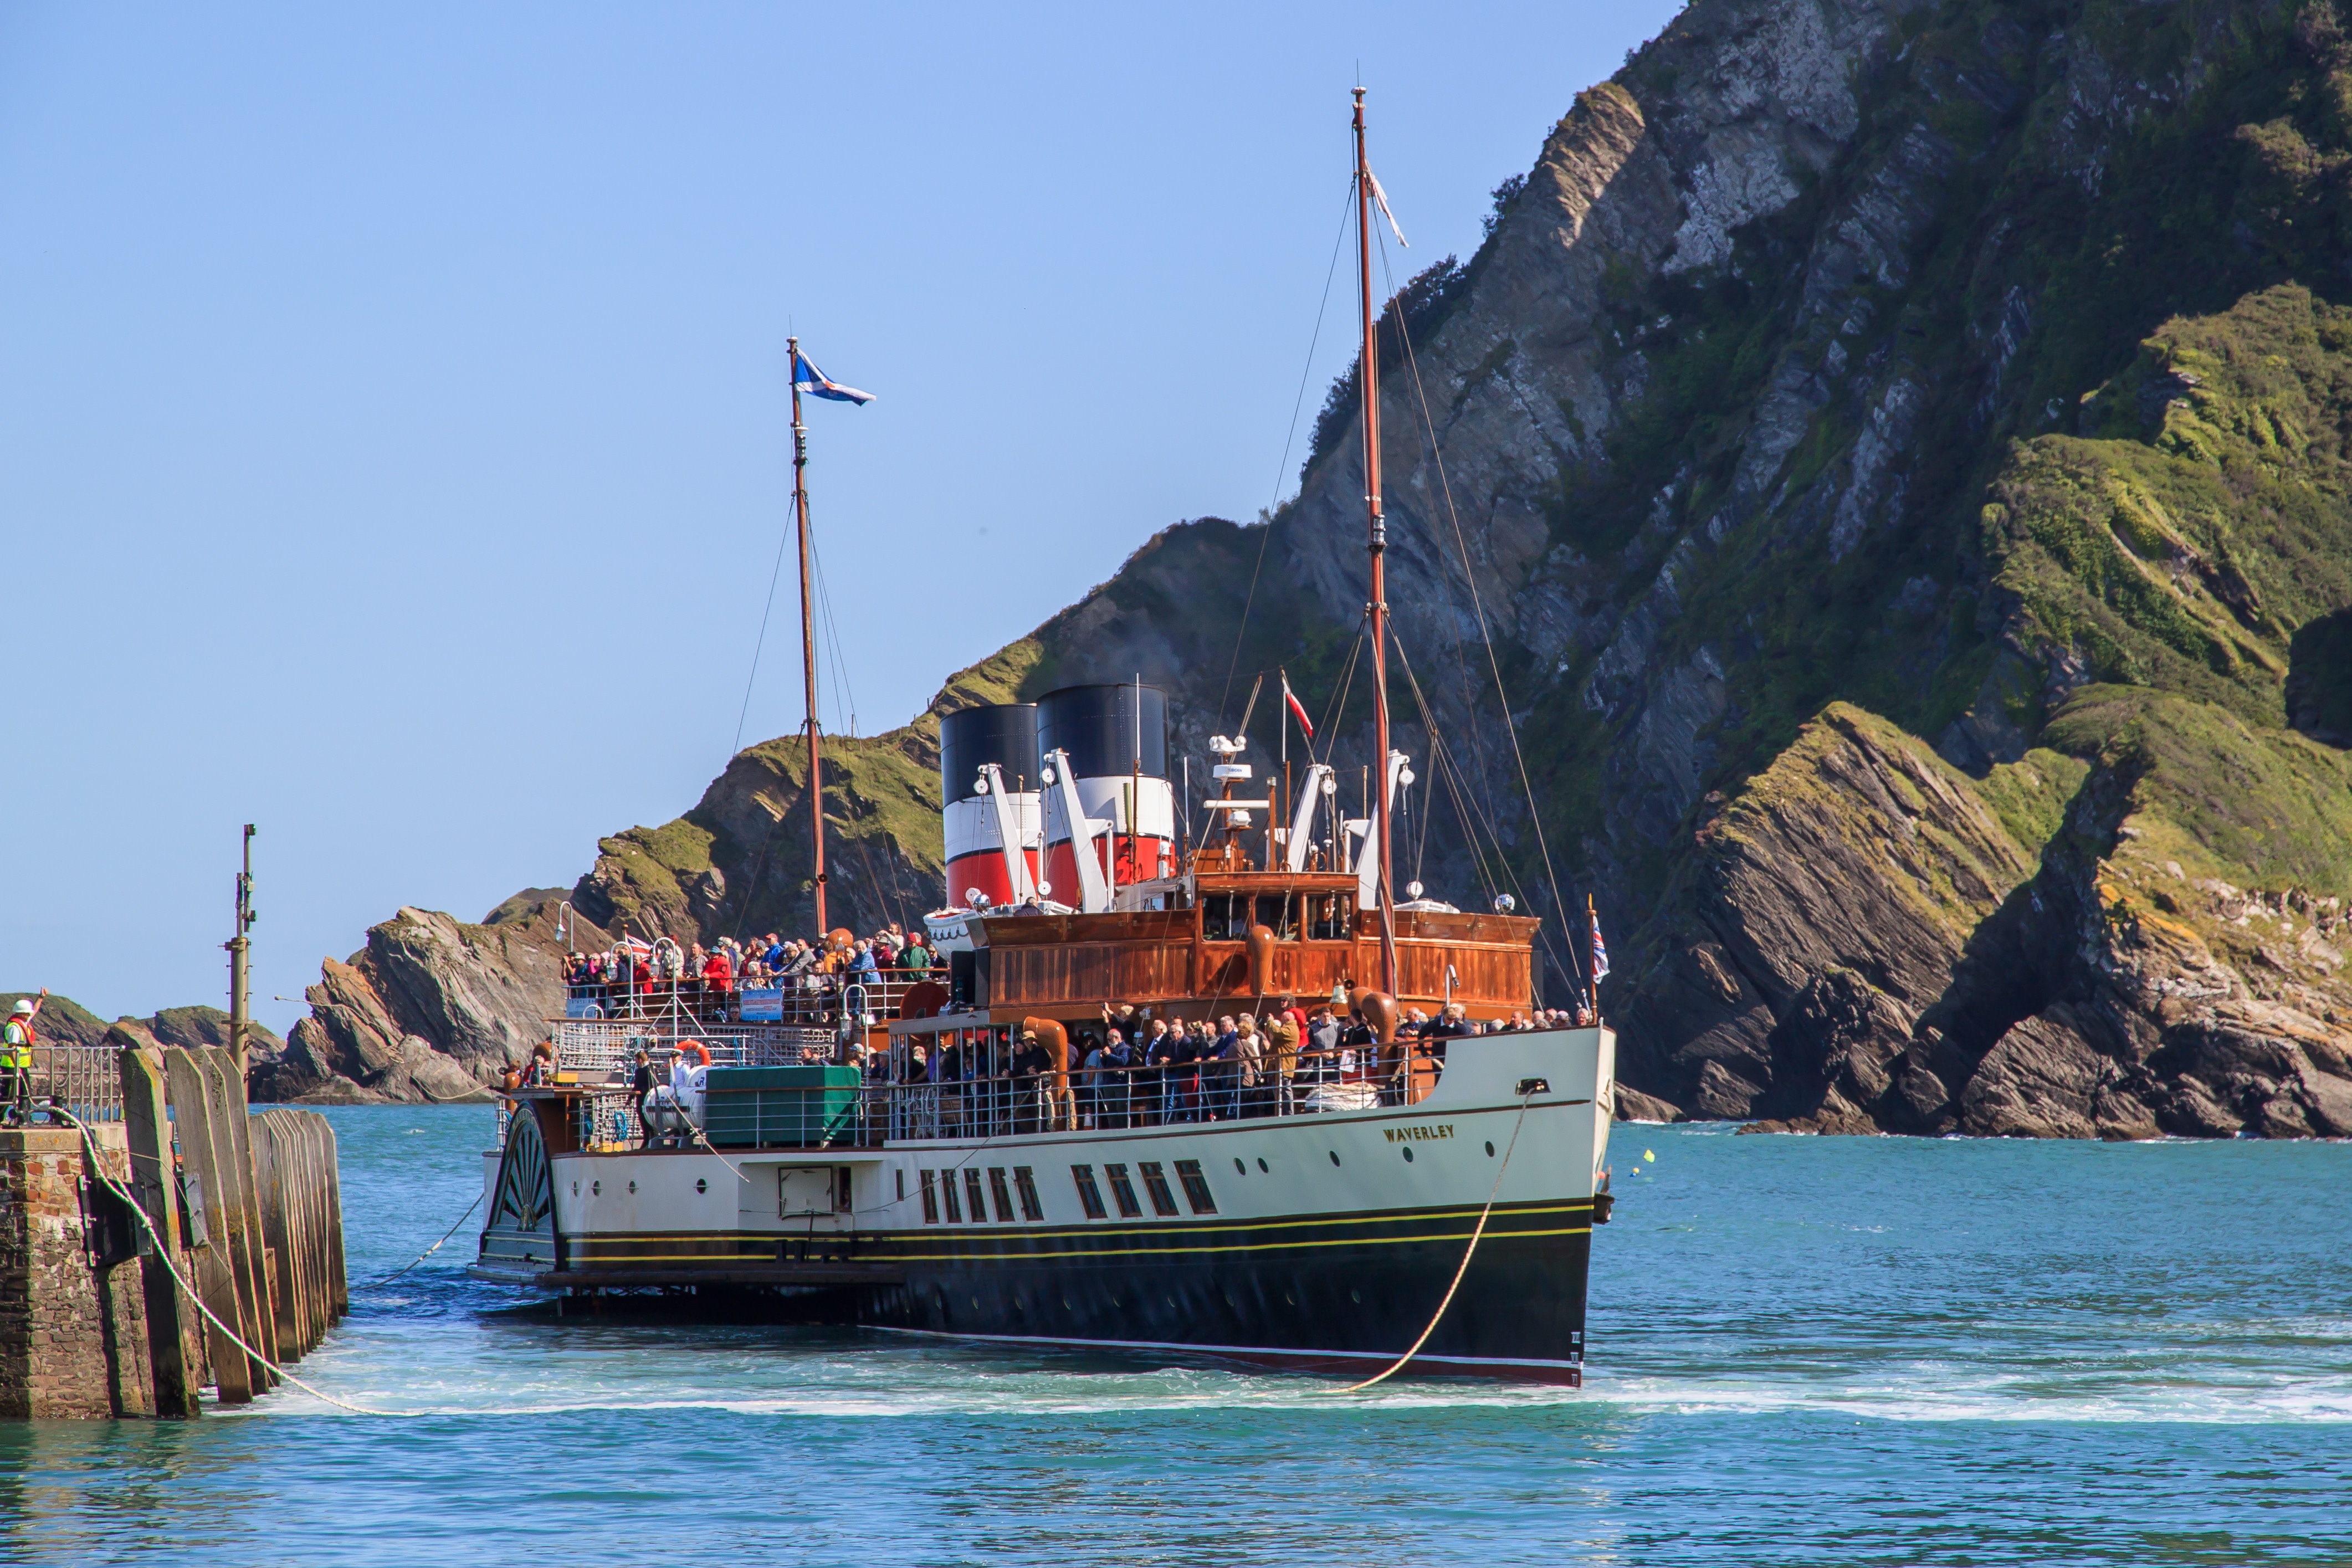 June: The Waverley at Ilfracombe